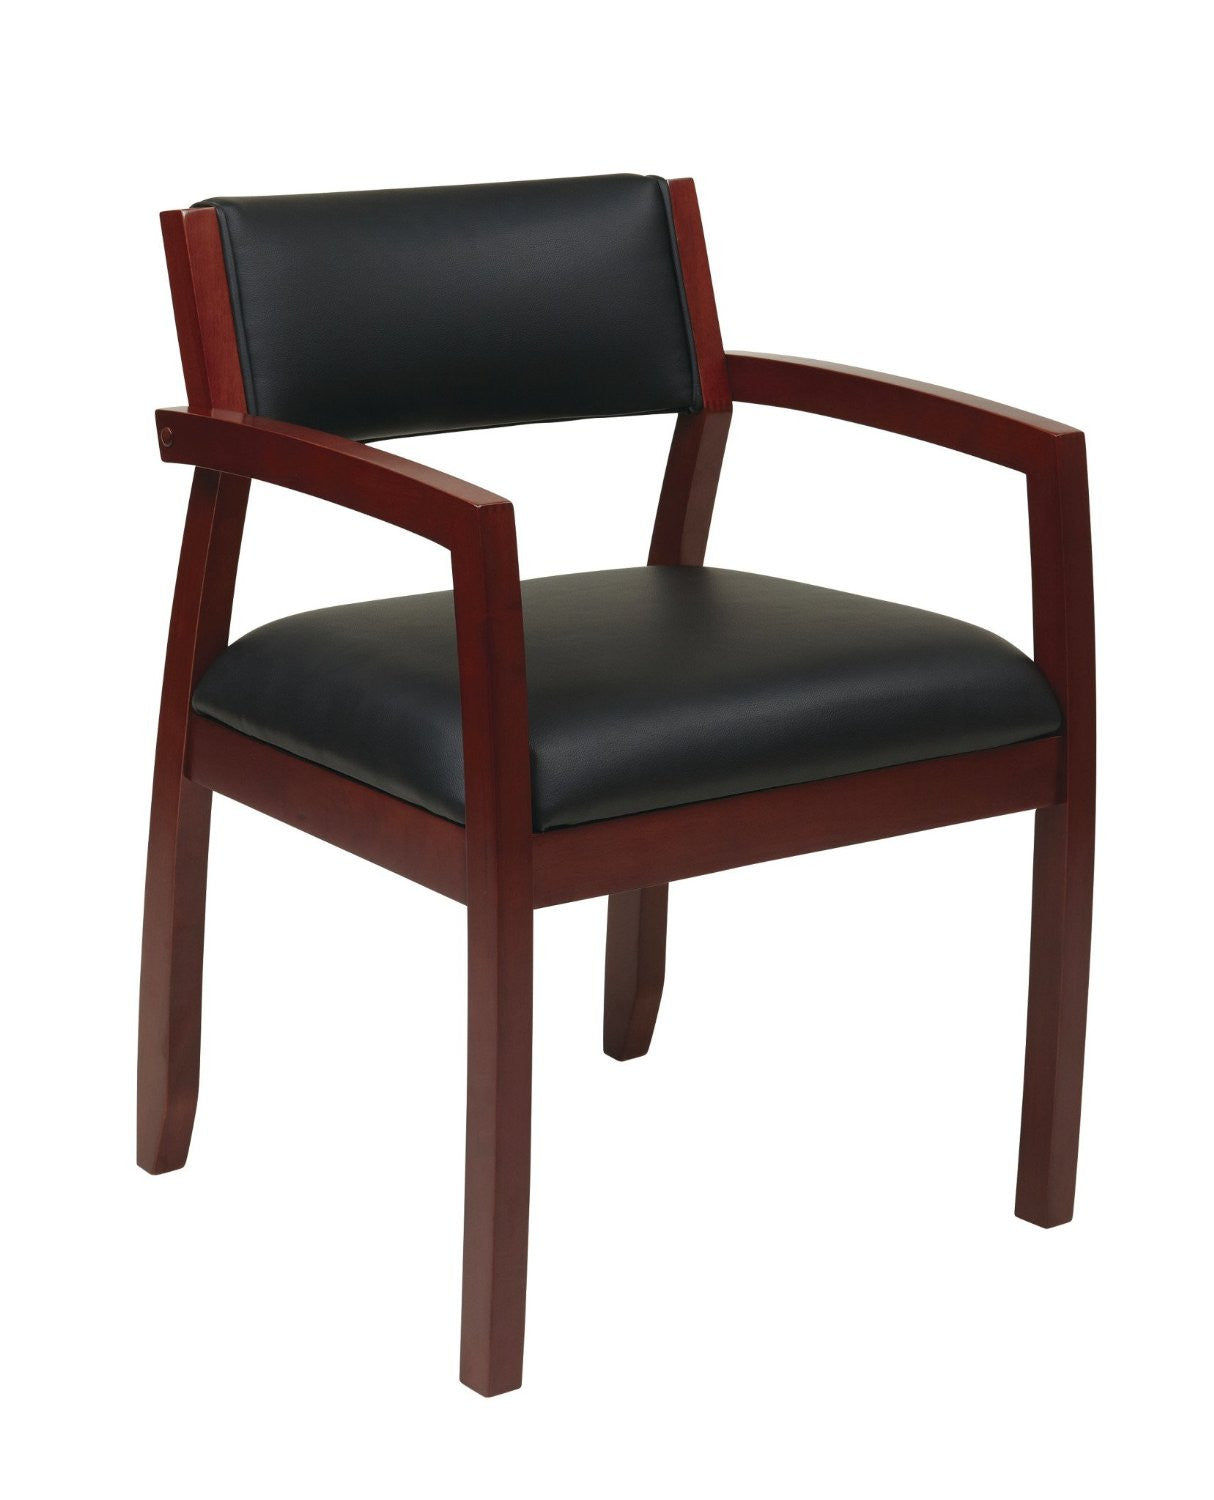 Osp Furniture Nap95chy-3 Napa Cherry Guest Chair With Upholstered Back (1-pack)